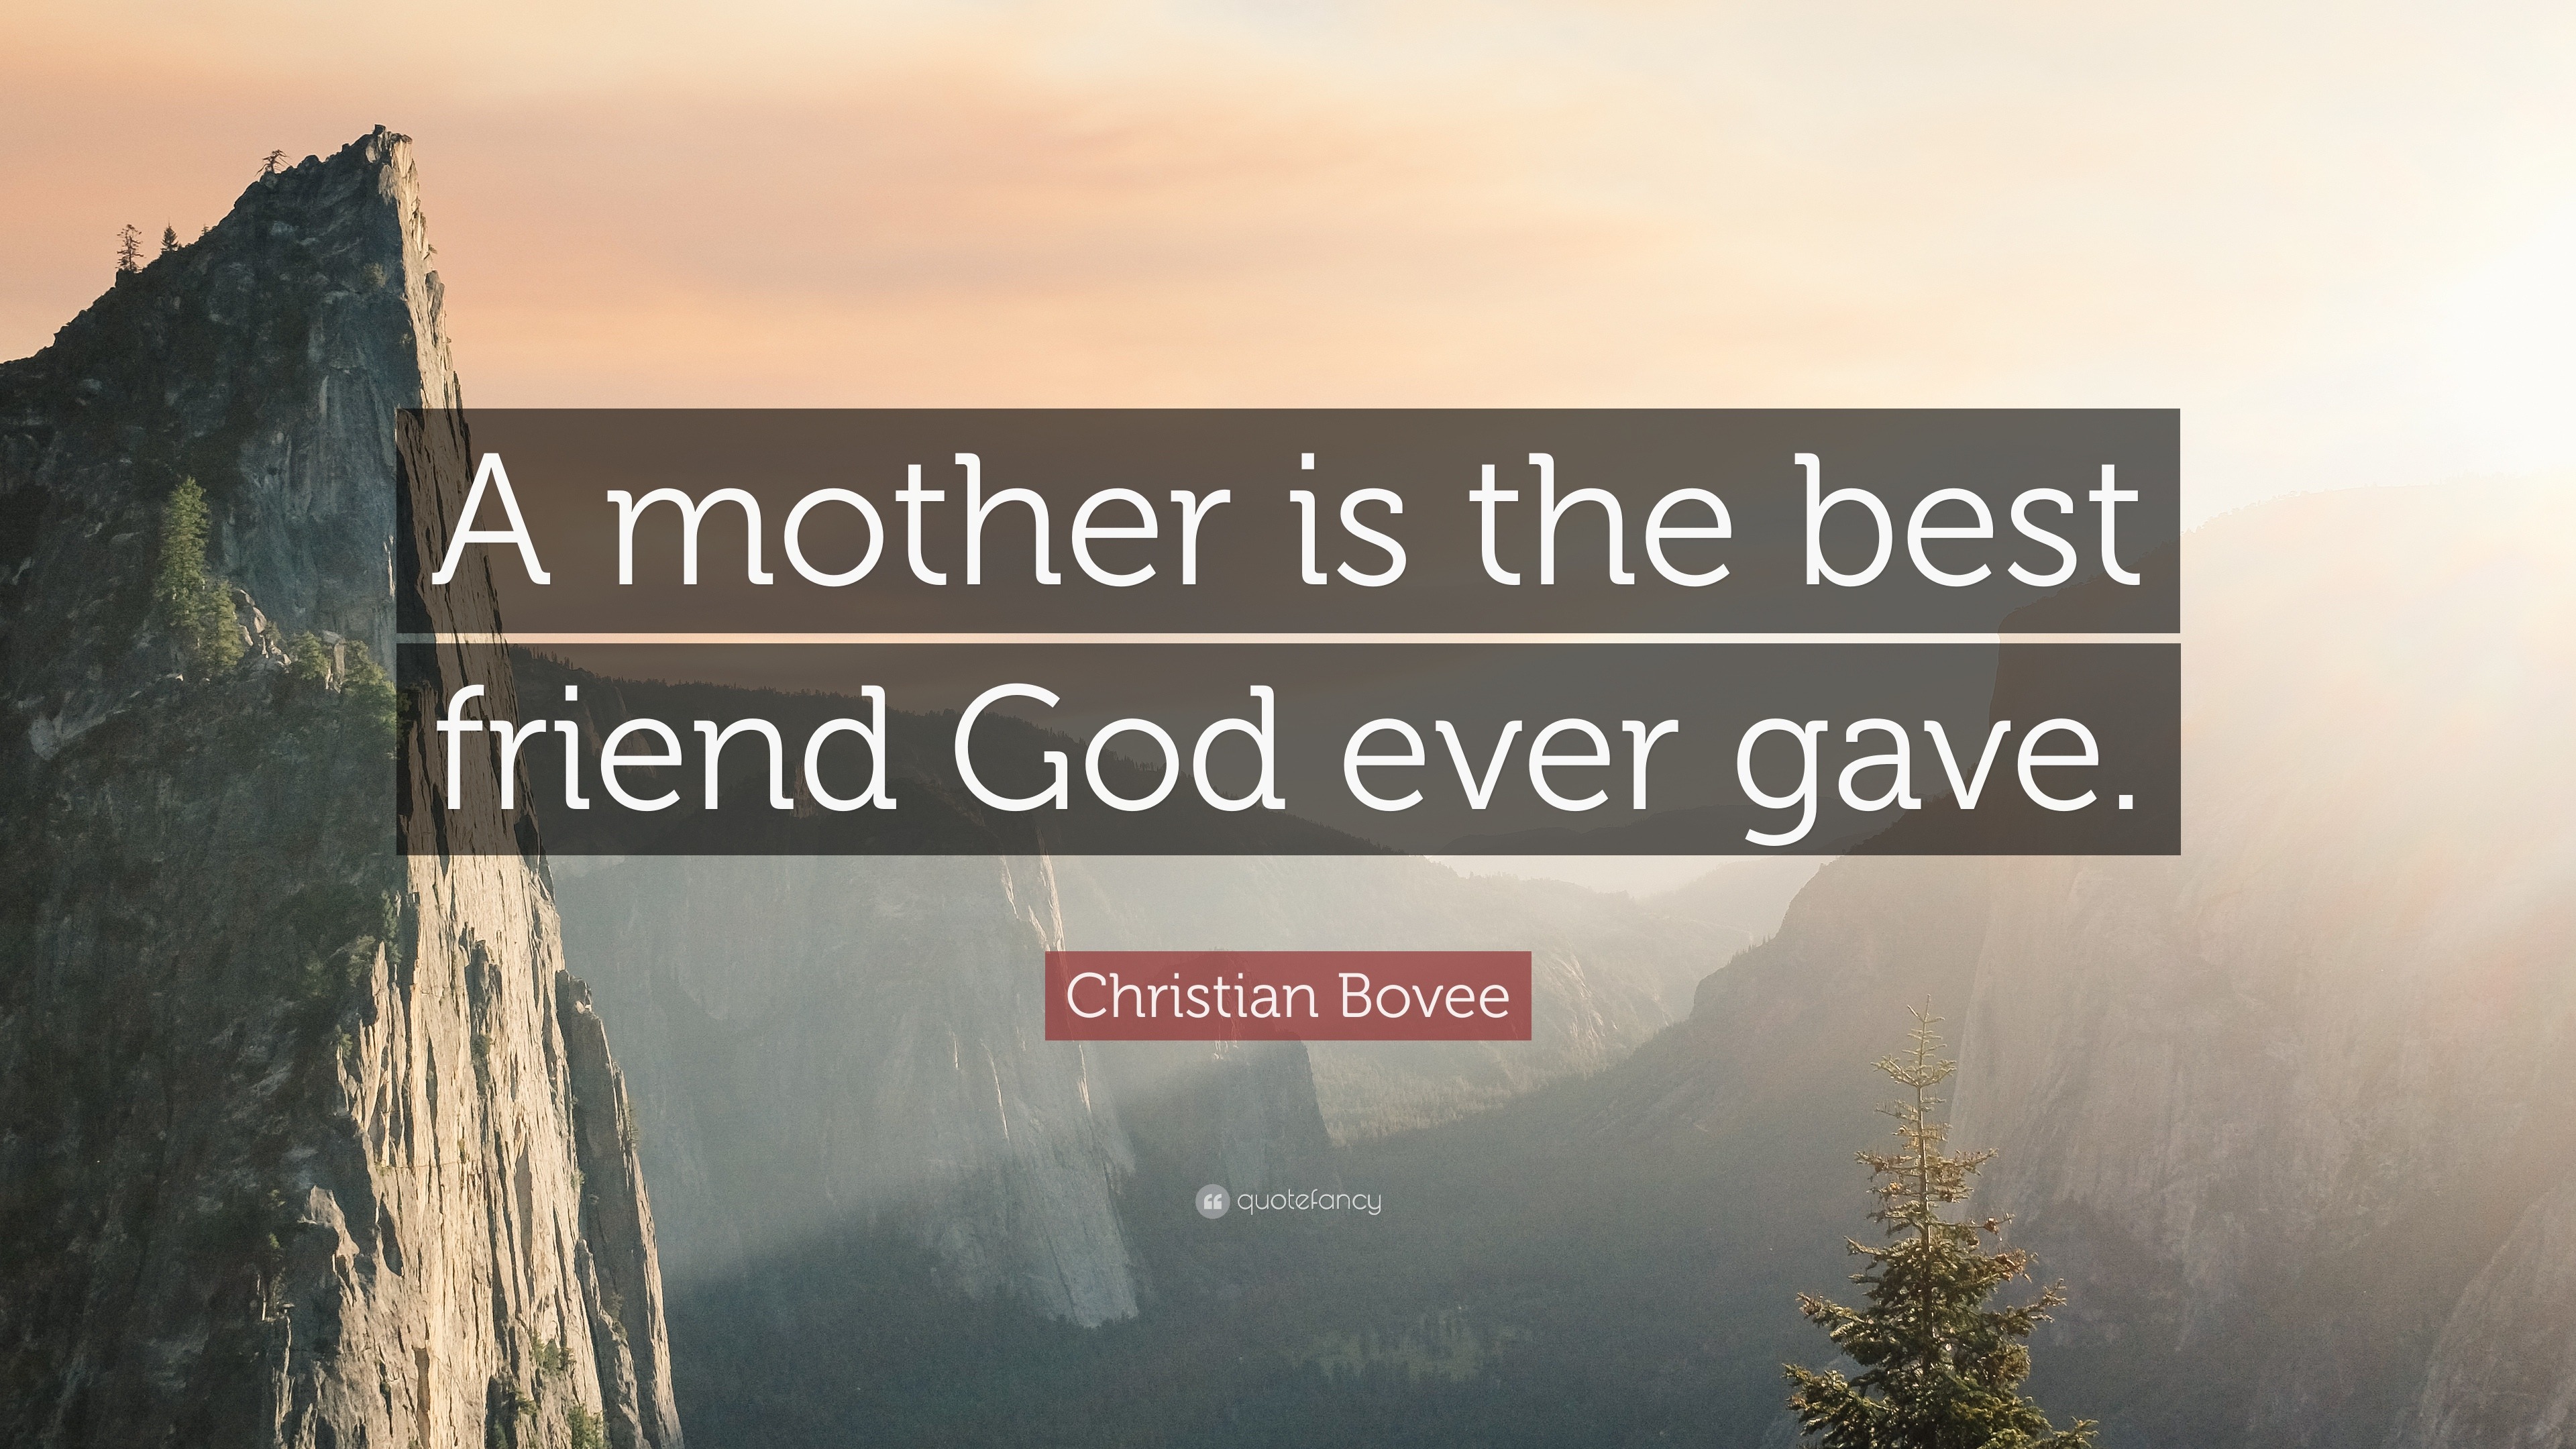 good christian friend quotes